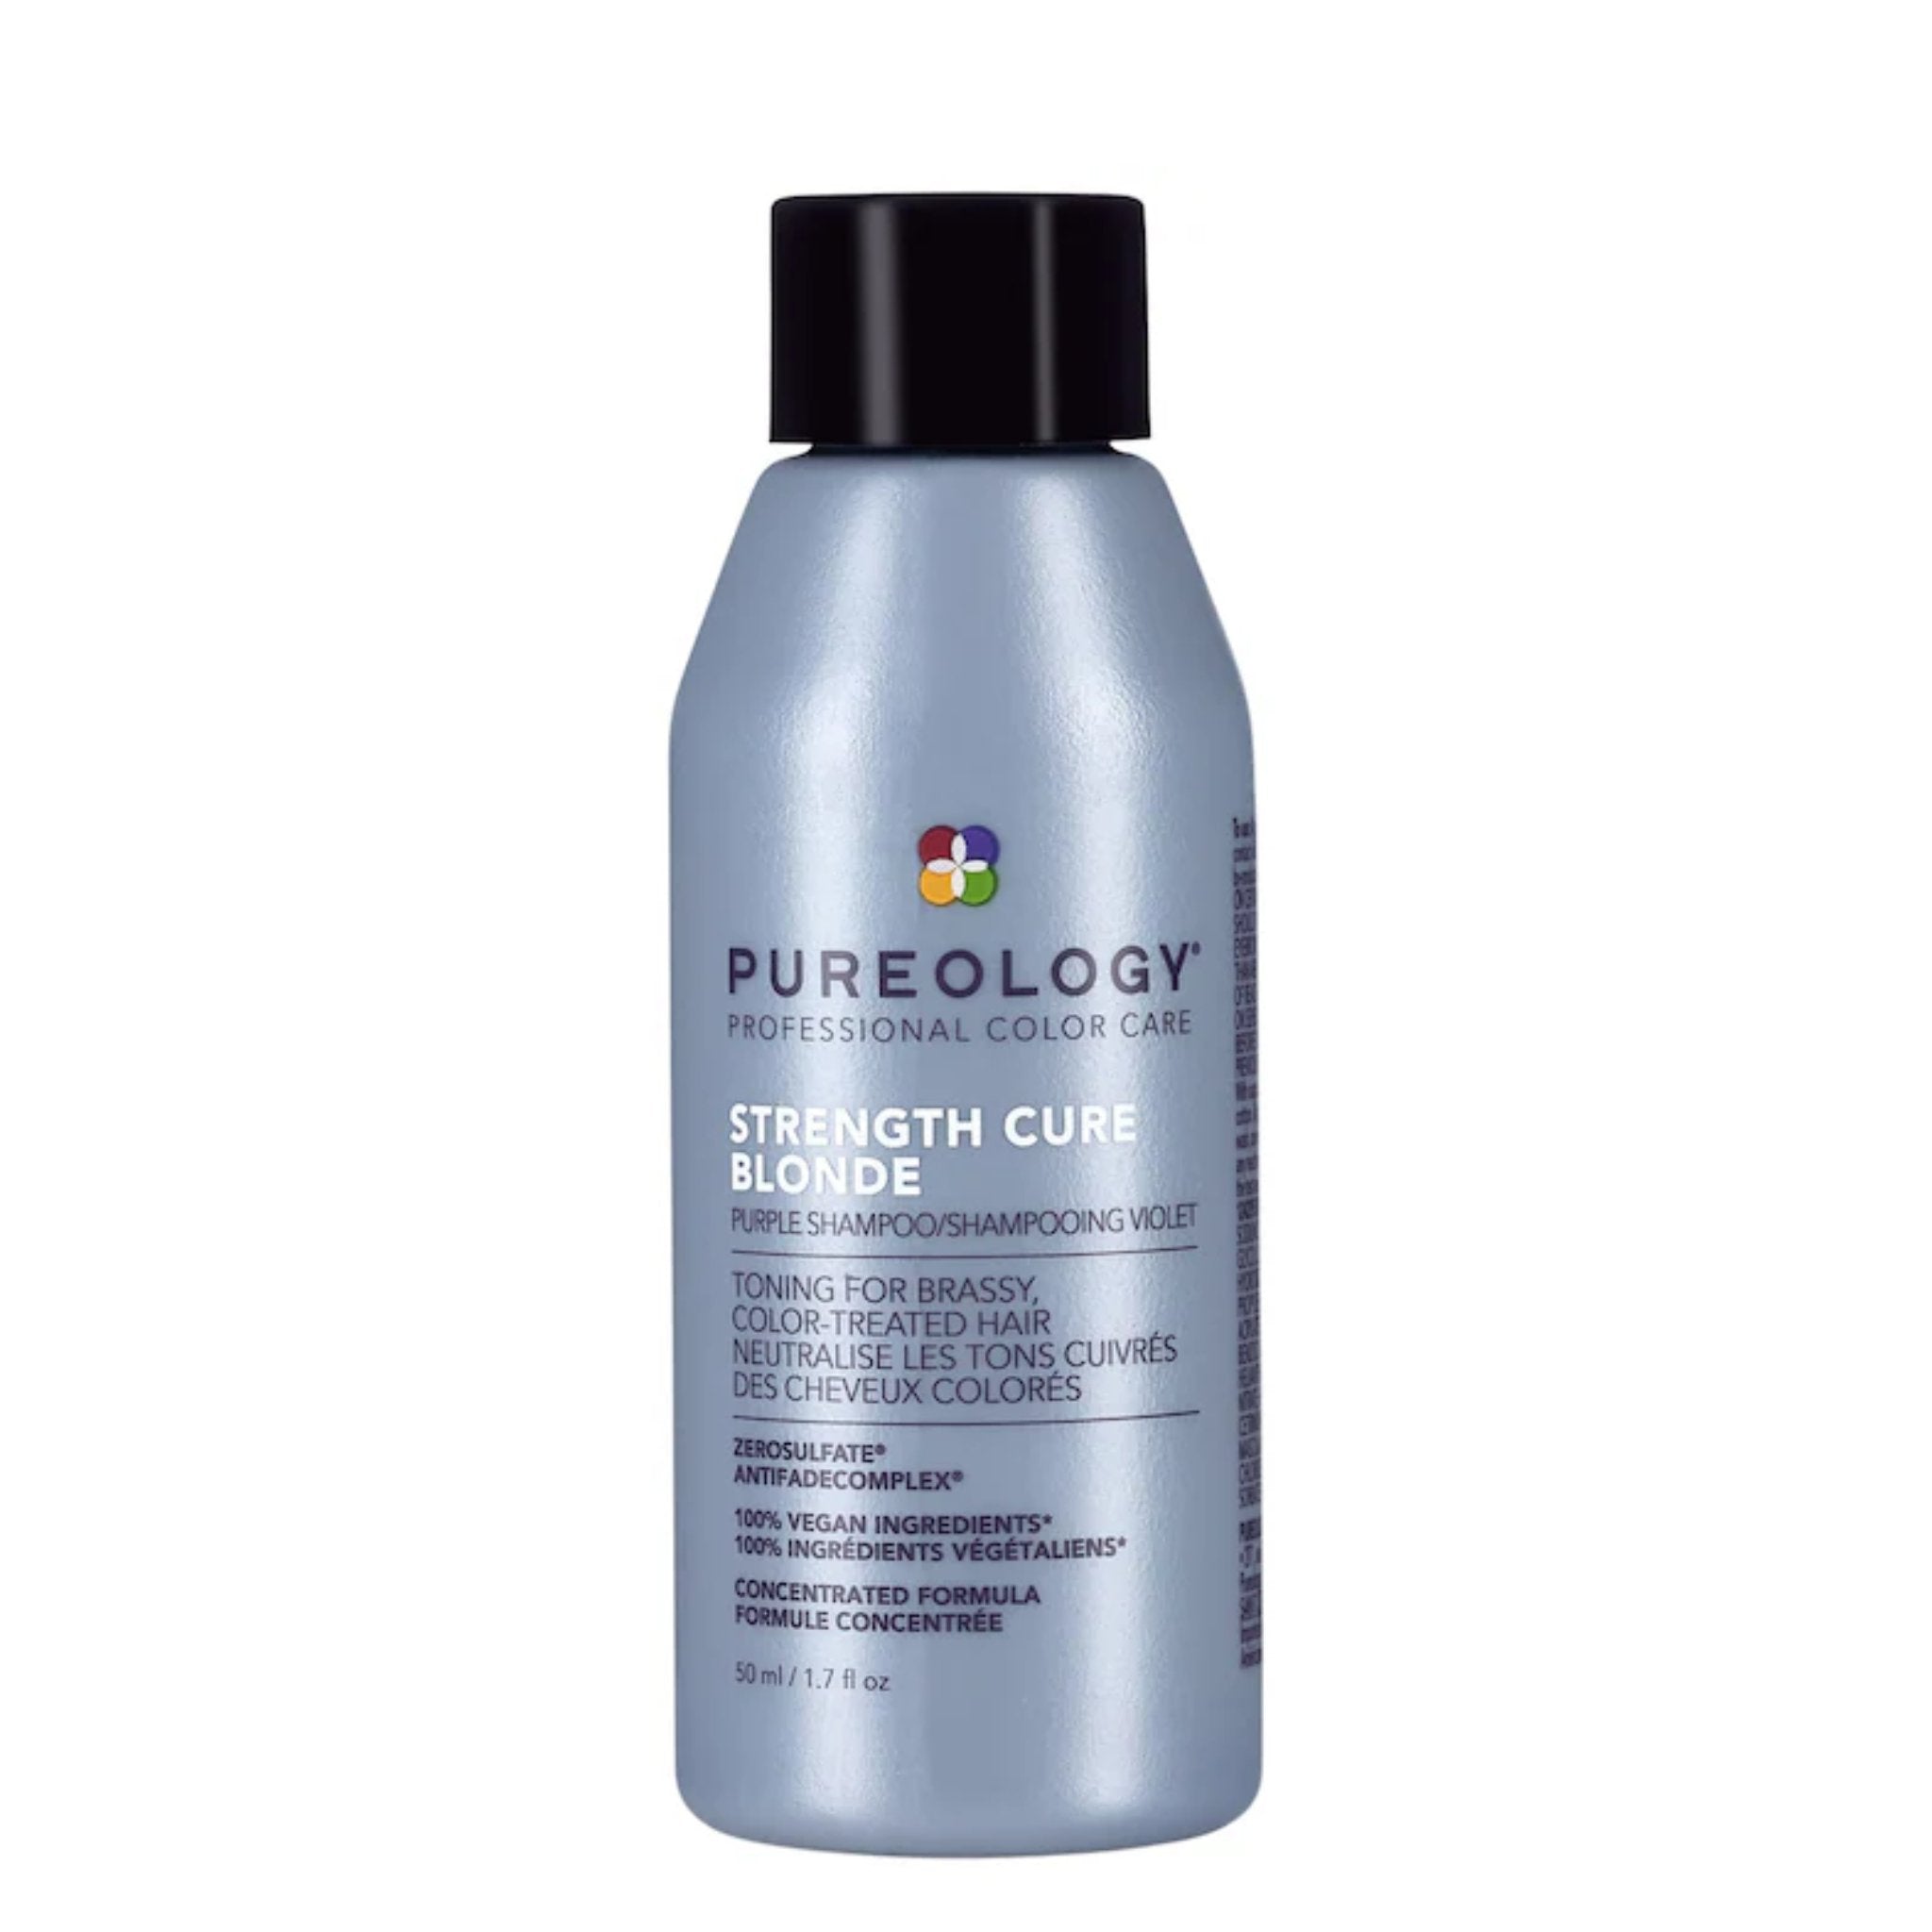 Pureology. Shampoing Violet Strength Cure Blonde - 50 ml - Concept C. Shop